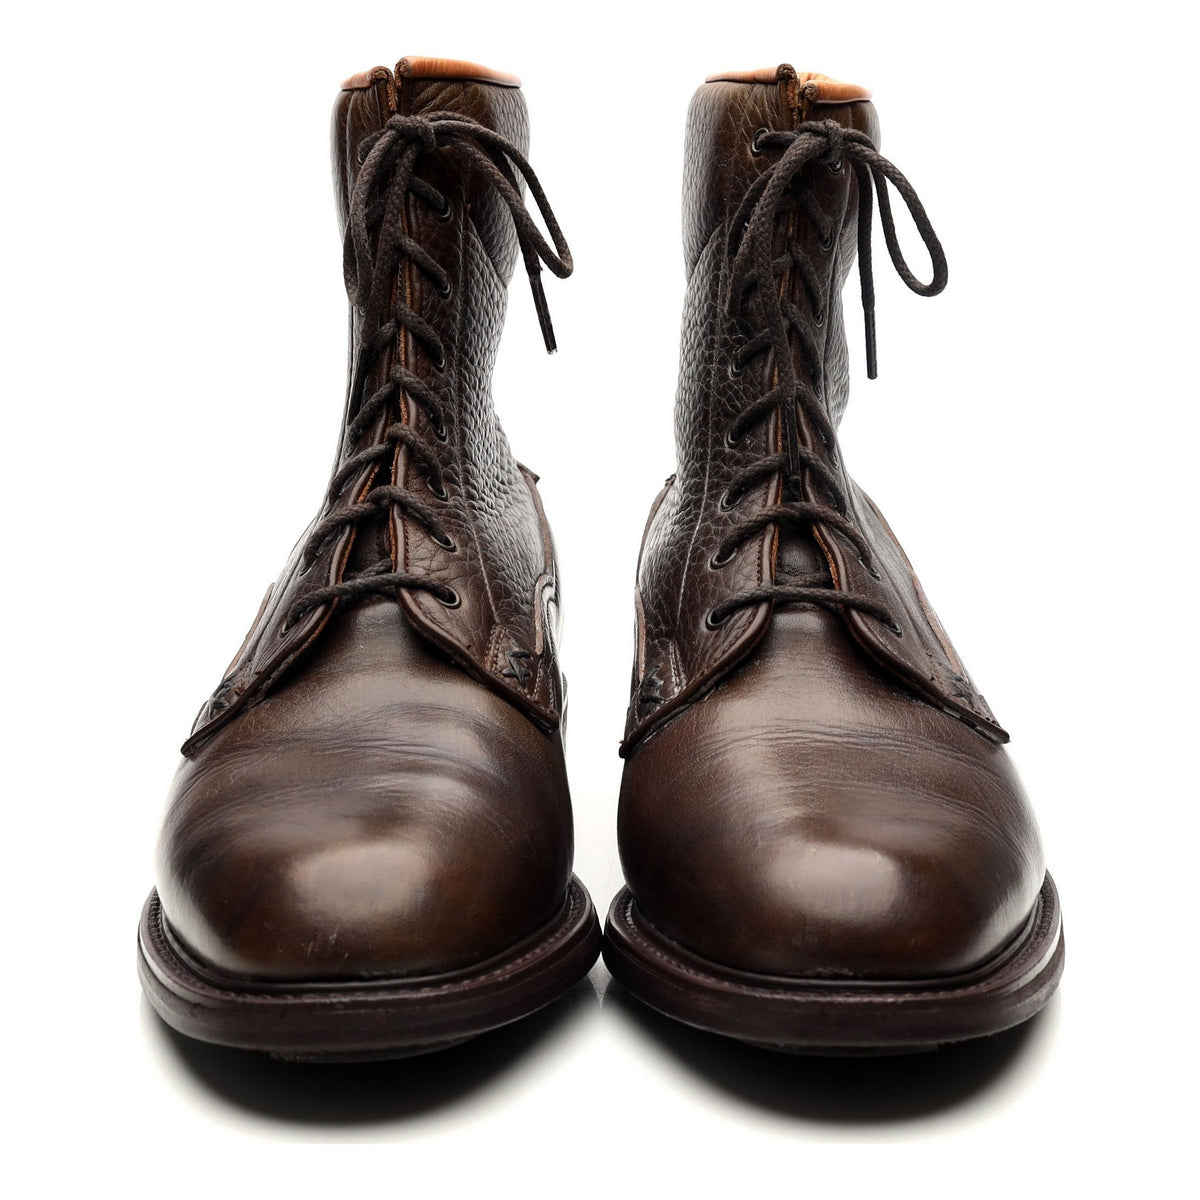 Dark Brown Leather Boots UK 7 F